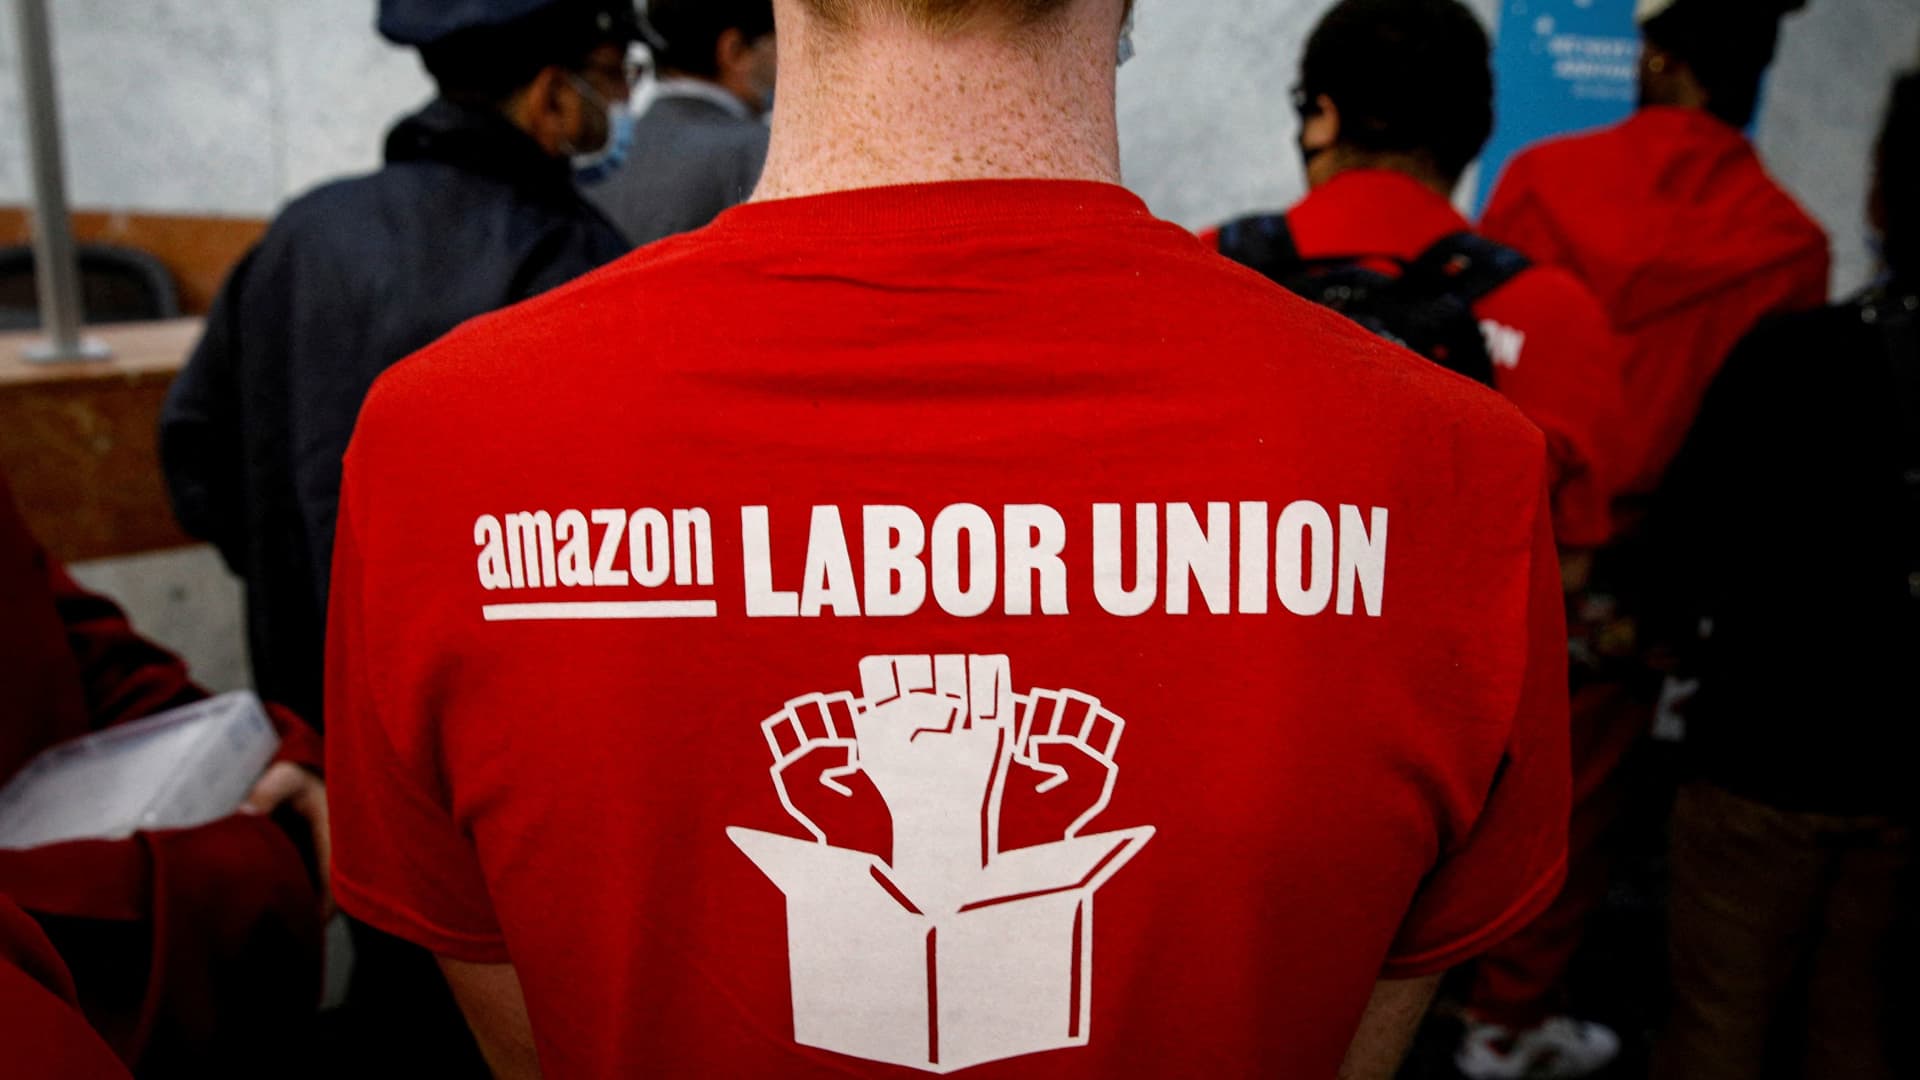 Amazon’s first U.S. labor union moves to affiliate with Teamsters